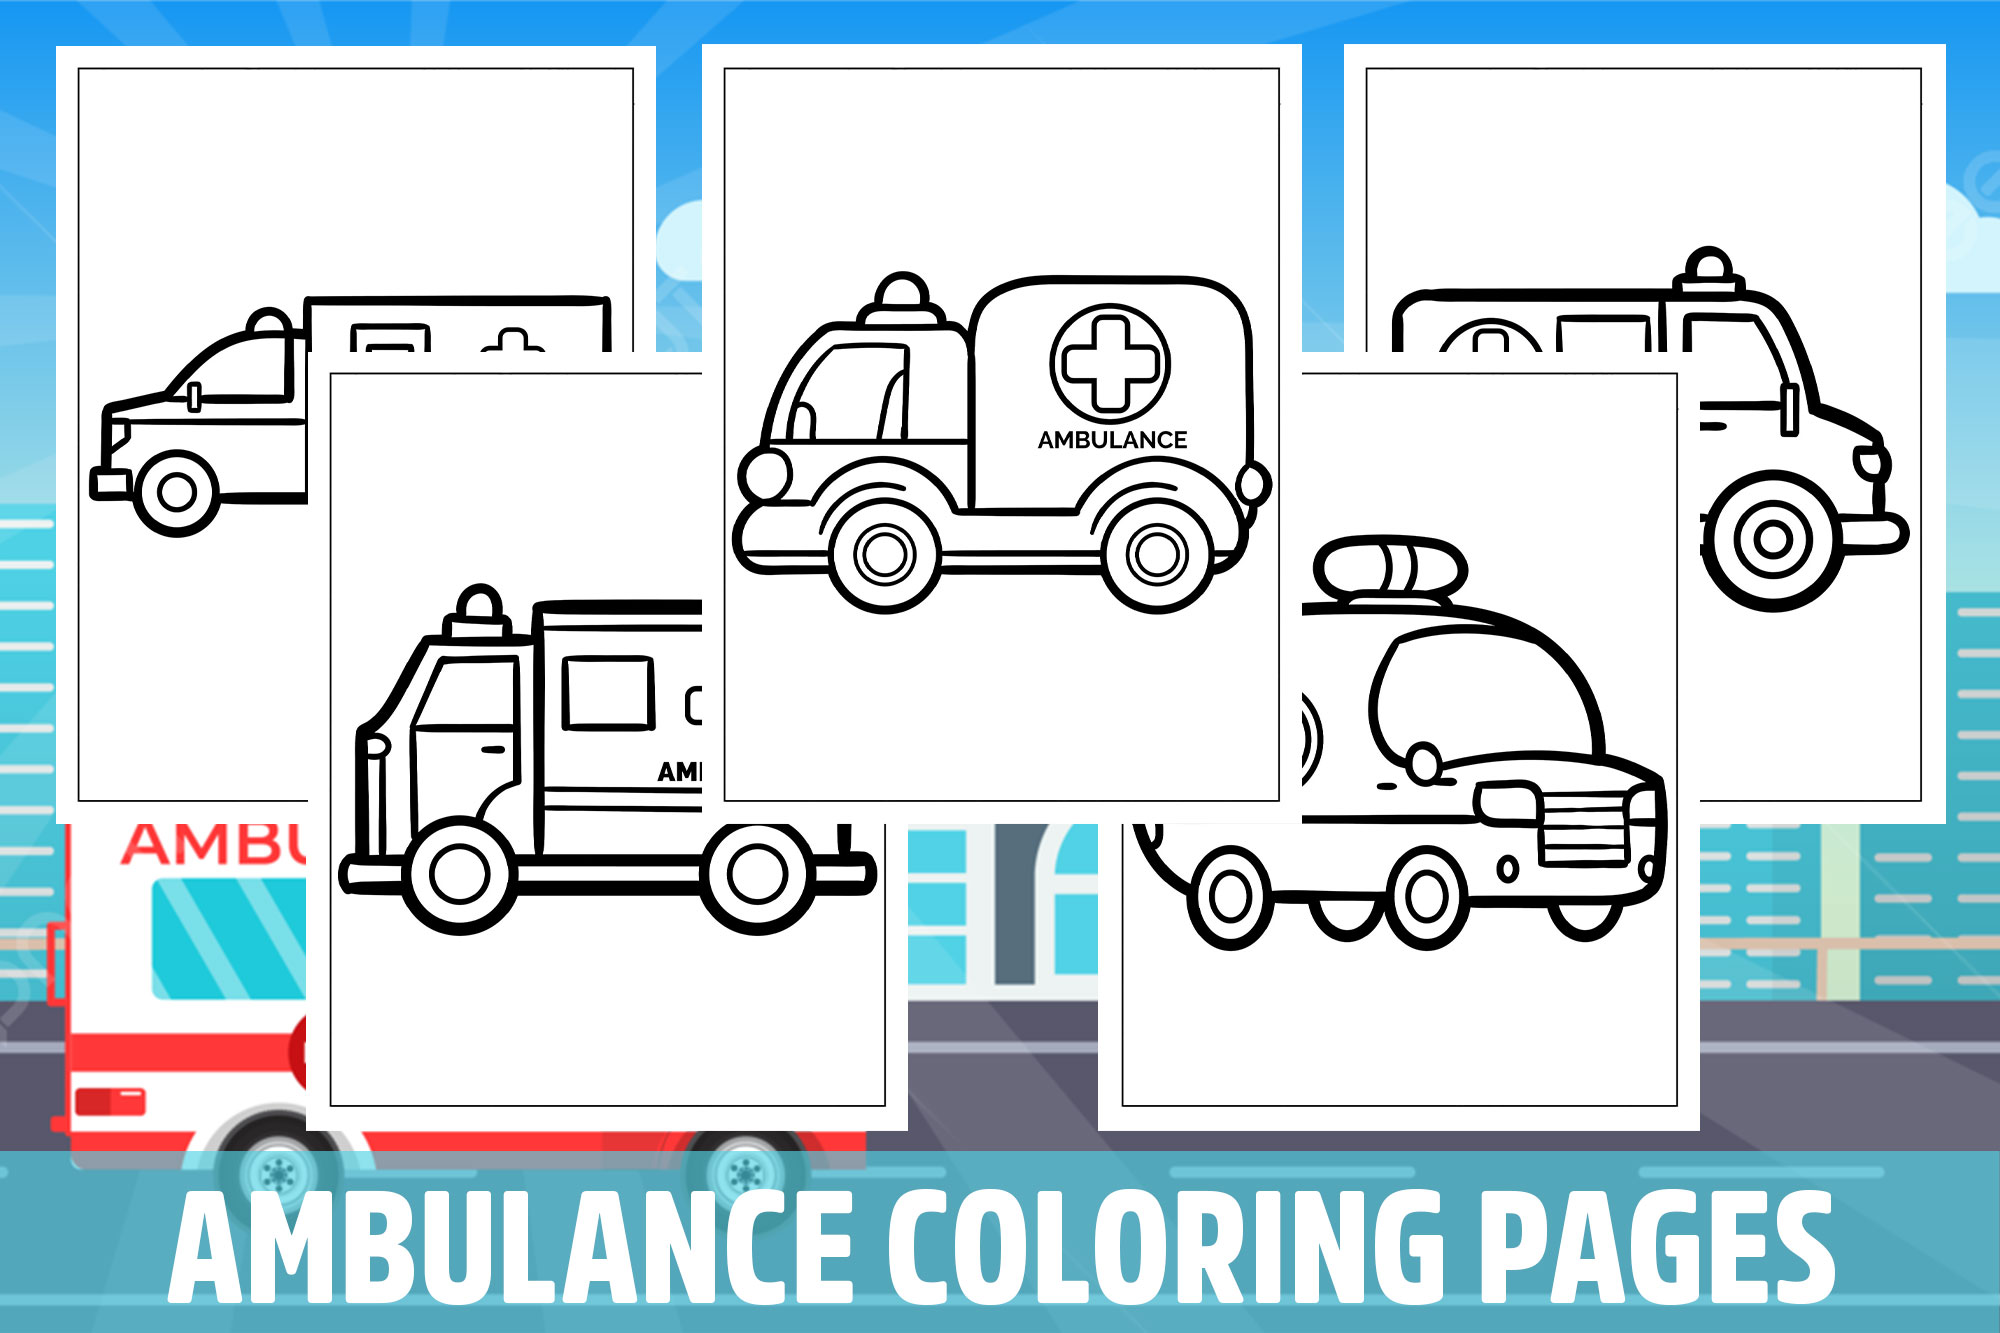 Ambulance coloring pages for kids girls boys teens birthday school activity made by teachers